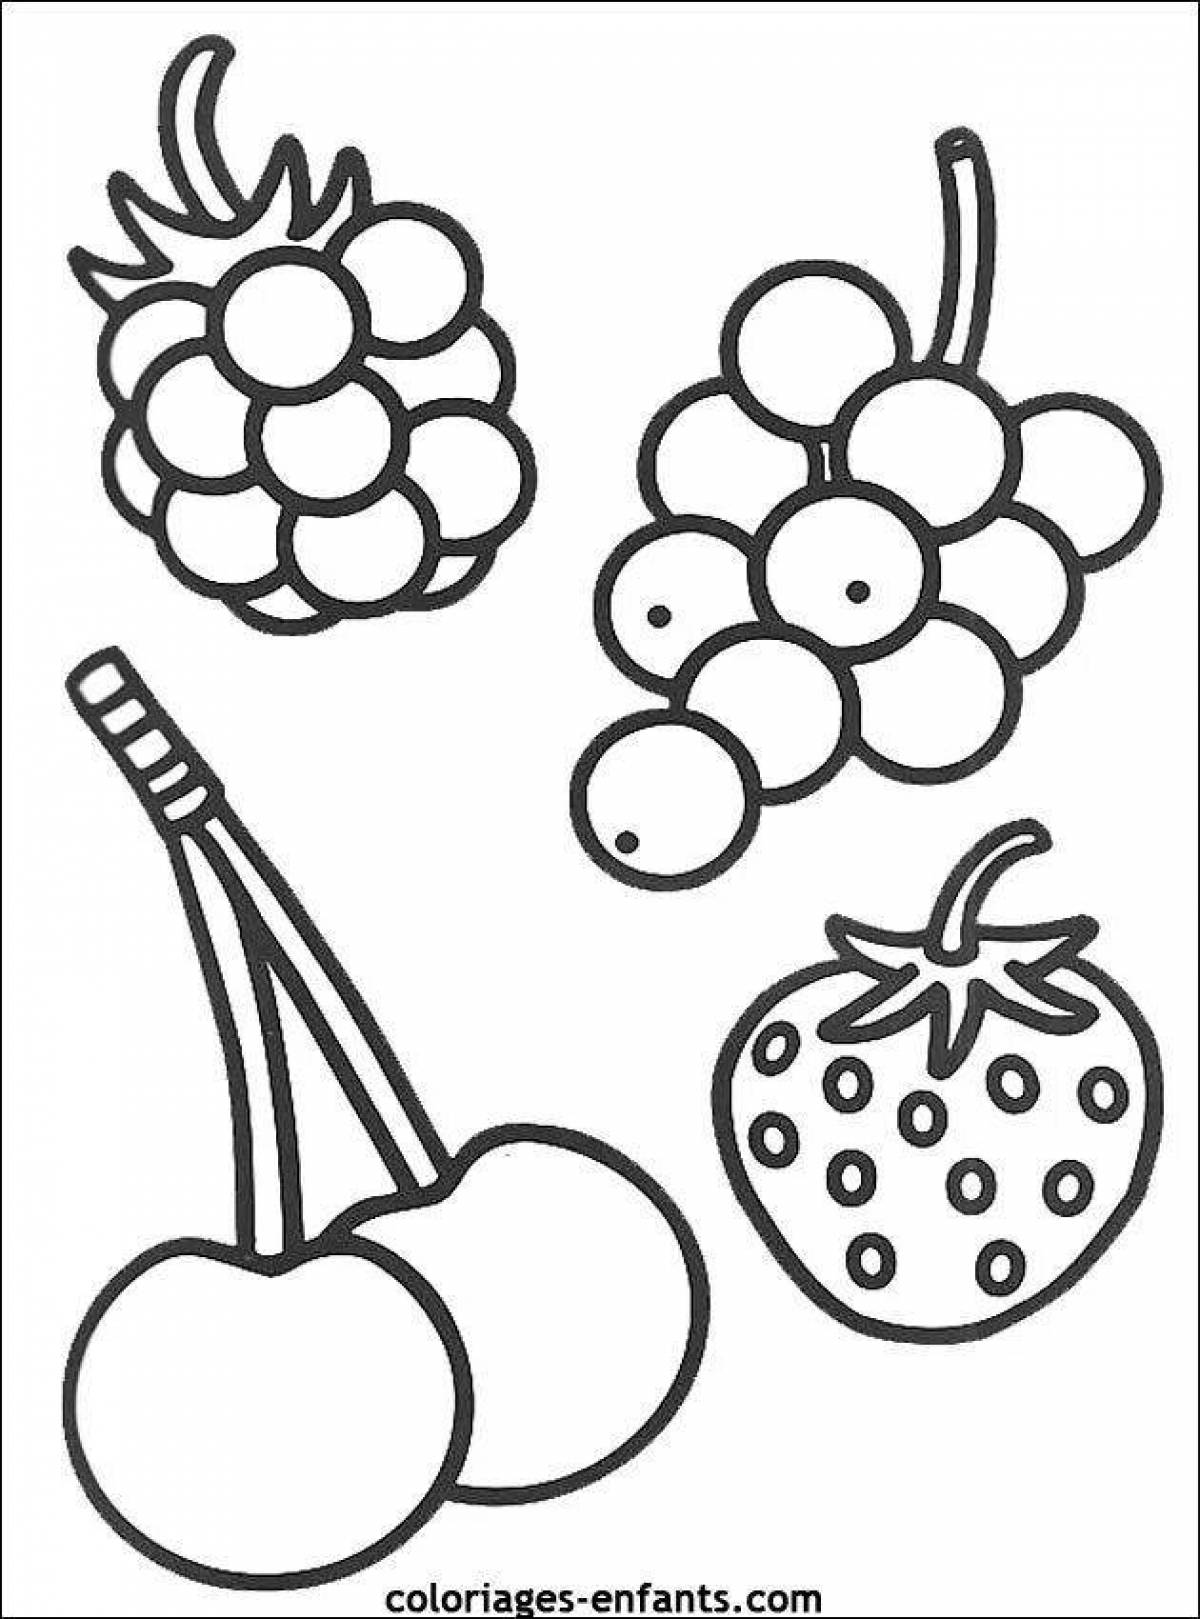 Coloring book useful berries and fruits